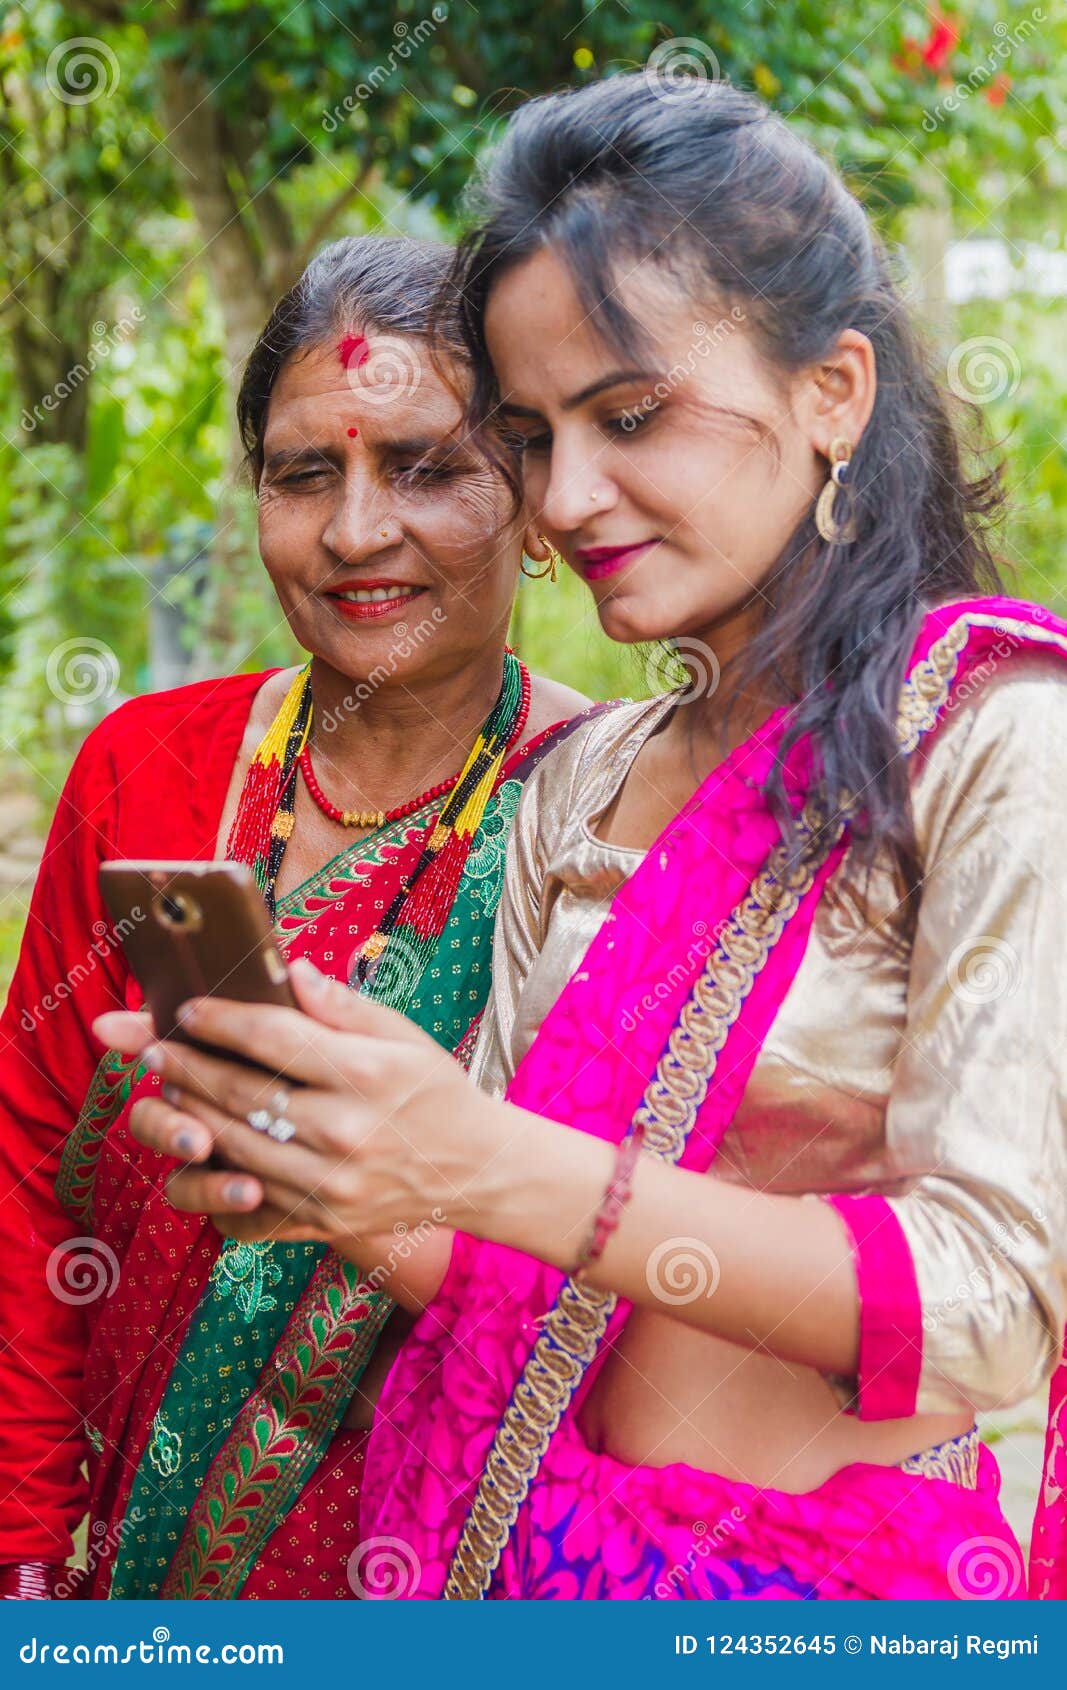 Beautiful Nepali Girl Showing Photo To Her Mother In Smartphone Editorial  Image - Image of nature, nepal: 124352645